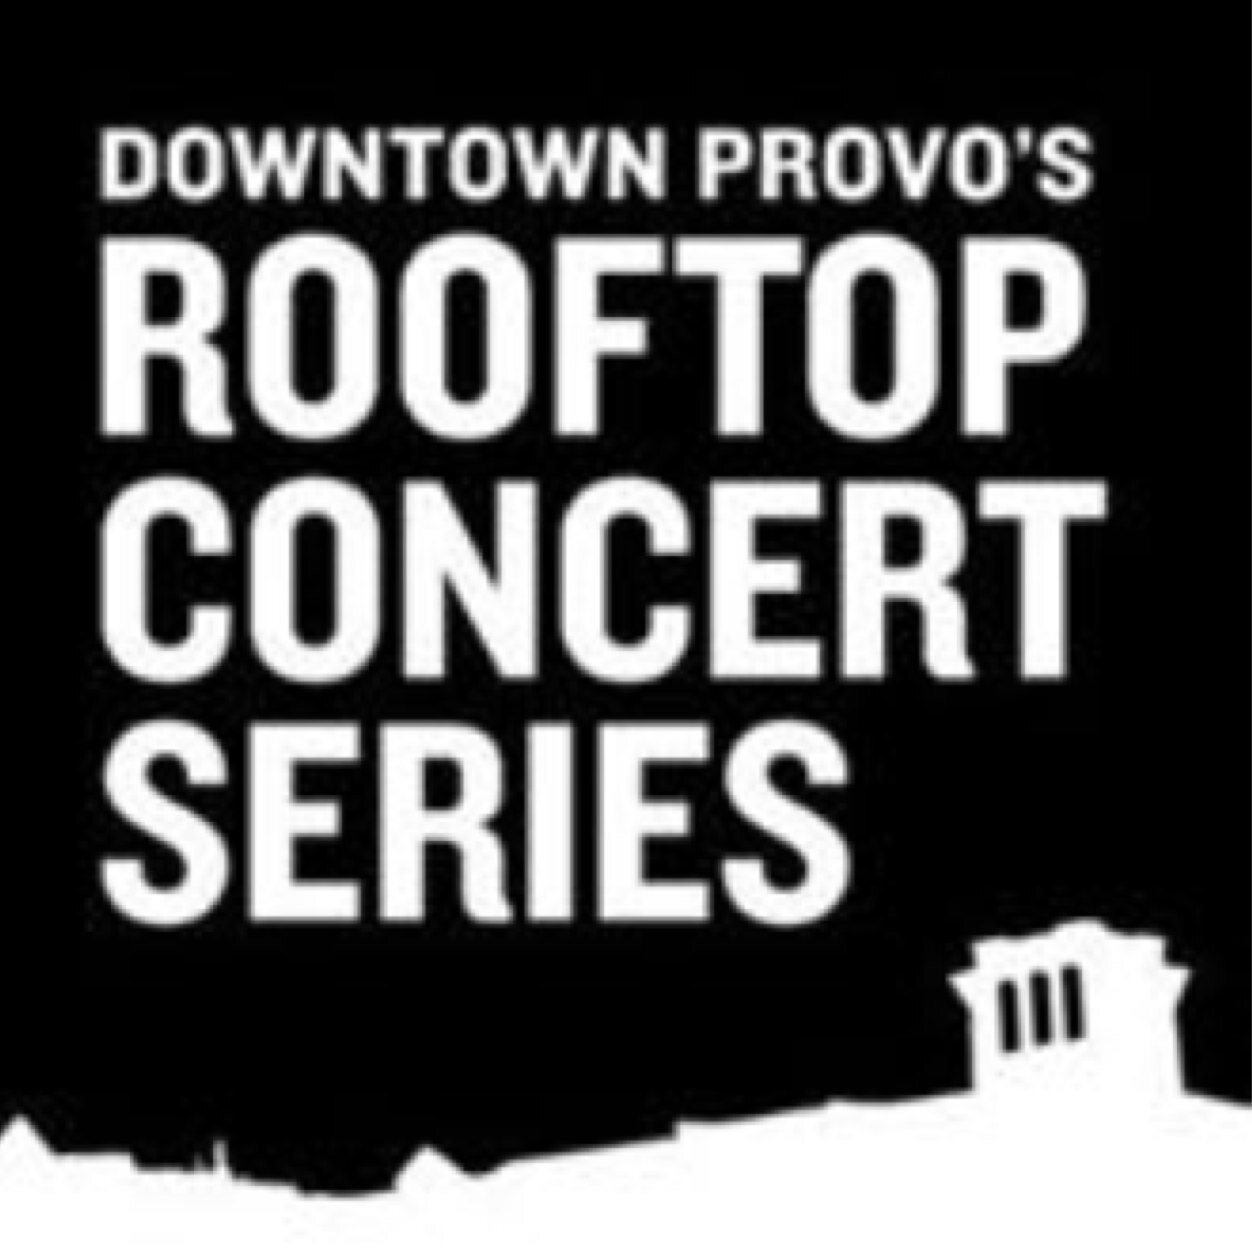 Free concerts the first Friday of each month, May - September in downtown Provo, Utah.